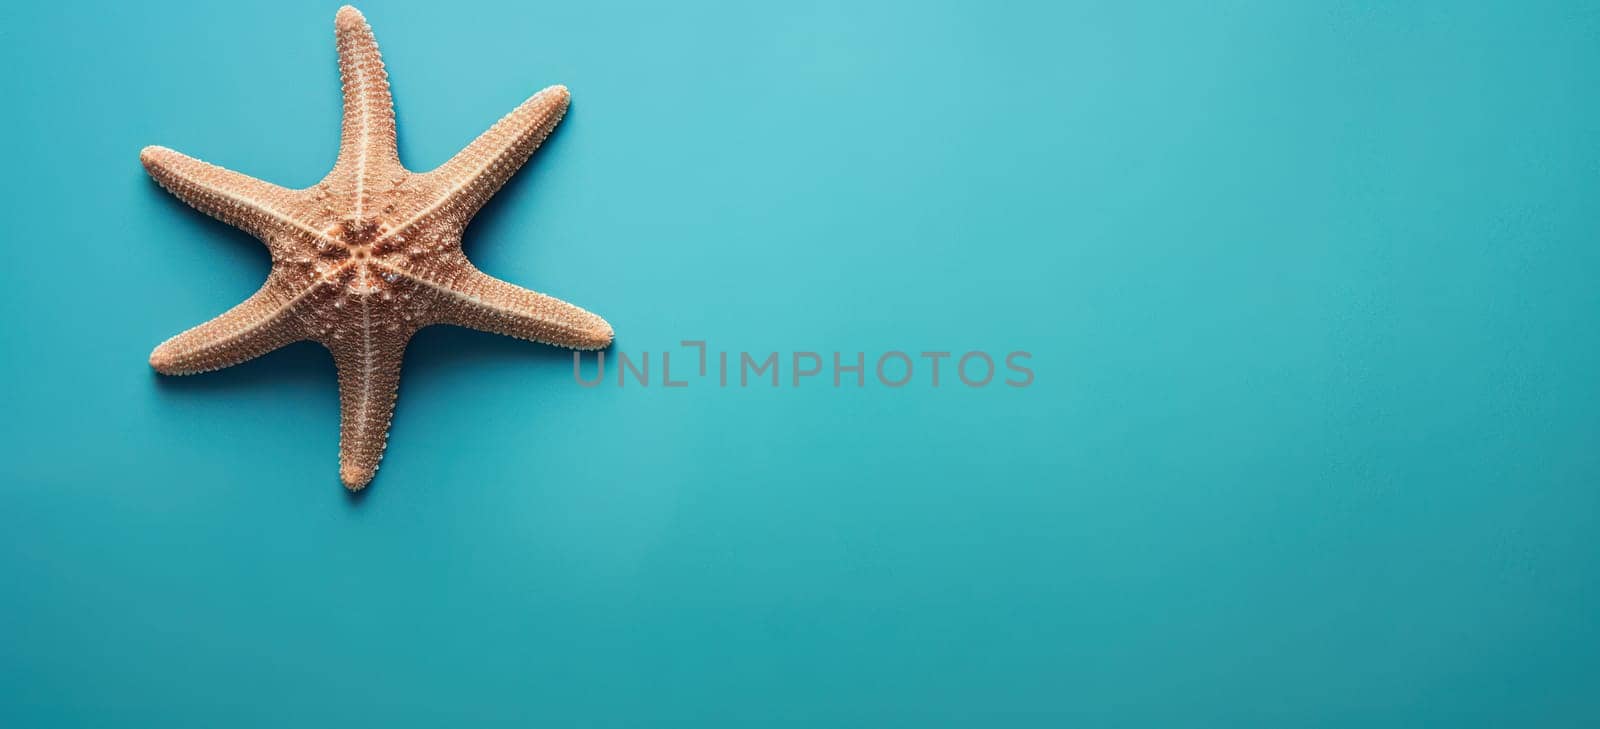 Stars of the Seashore: A Serene Blue Background with a Gorgeous Summer Vacation View - Starfish, Shells, and Marine Life Adorned with Exotic Patterns and Colorful Shapes by Vichizh